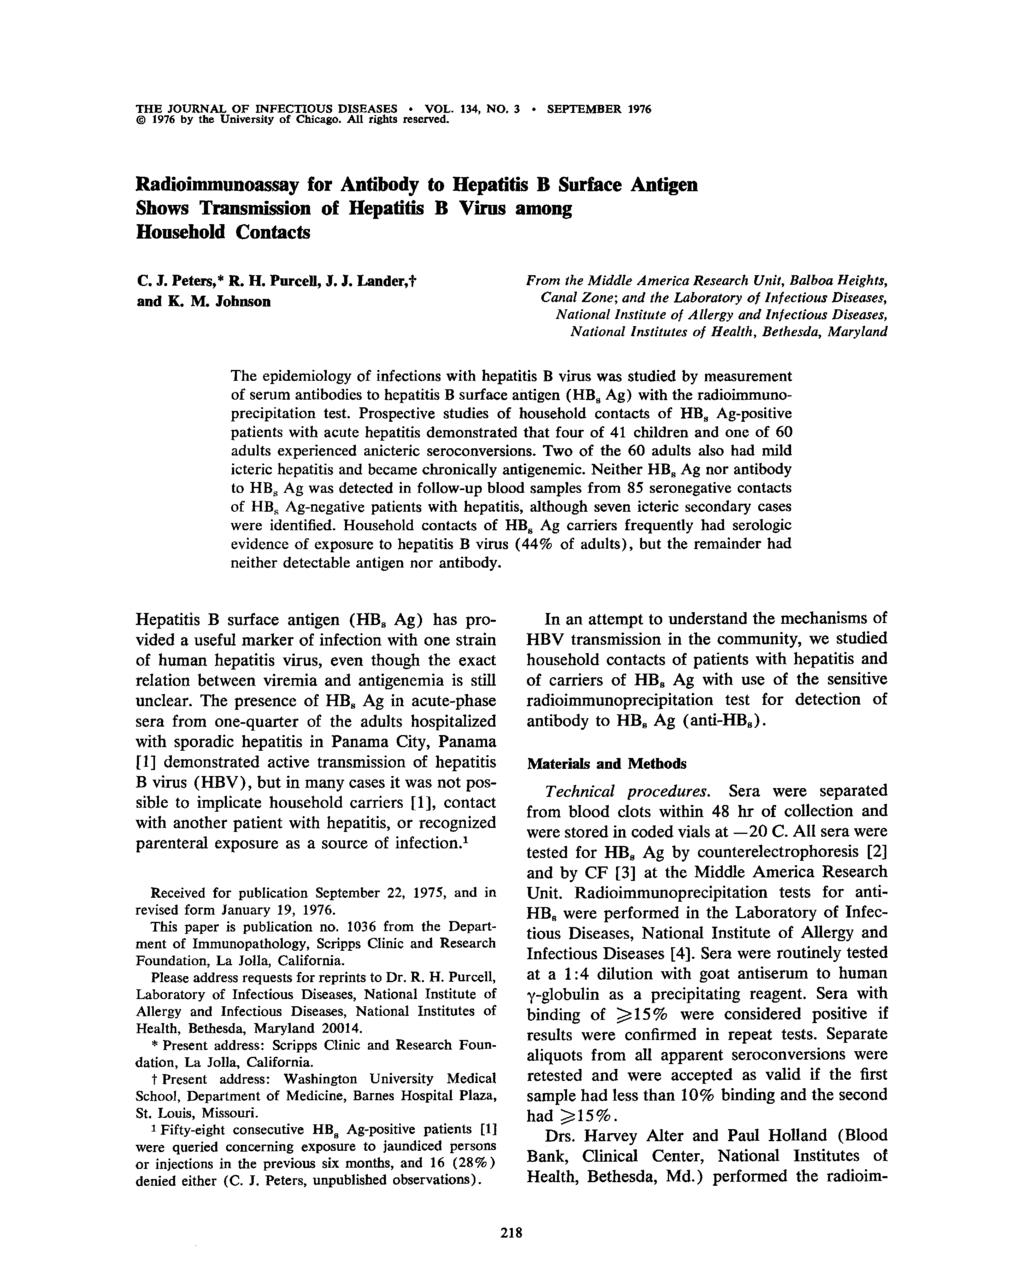 THE JOURNAL OF INFECTIOUS DISEASES VOL. 134, NO.3 SEPTEMBER 1976 1976 by the University f Chicag. All rights reserved.